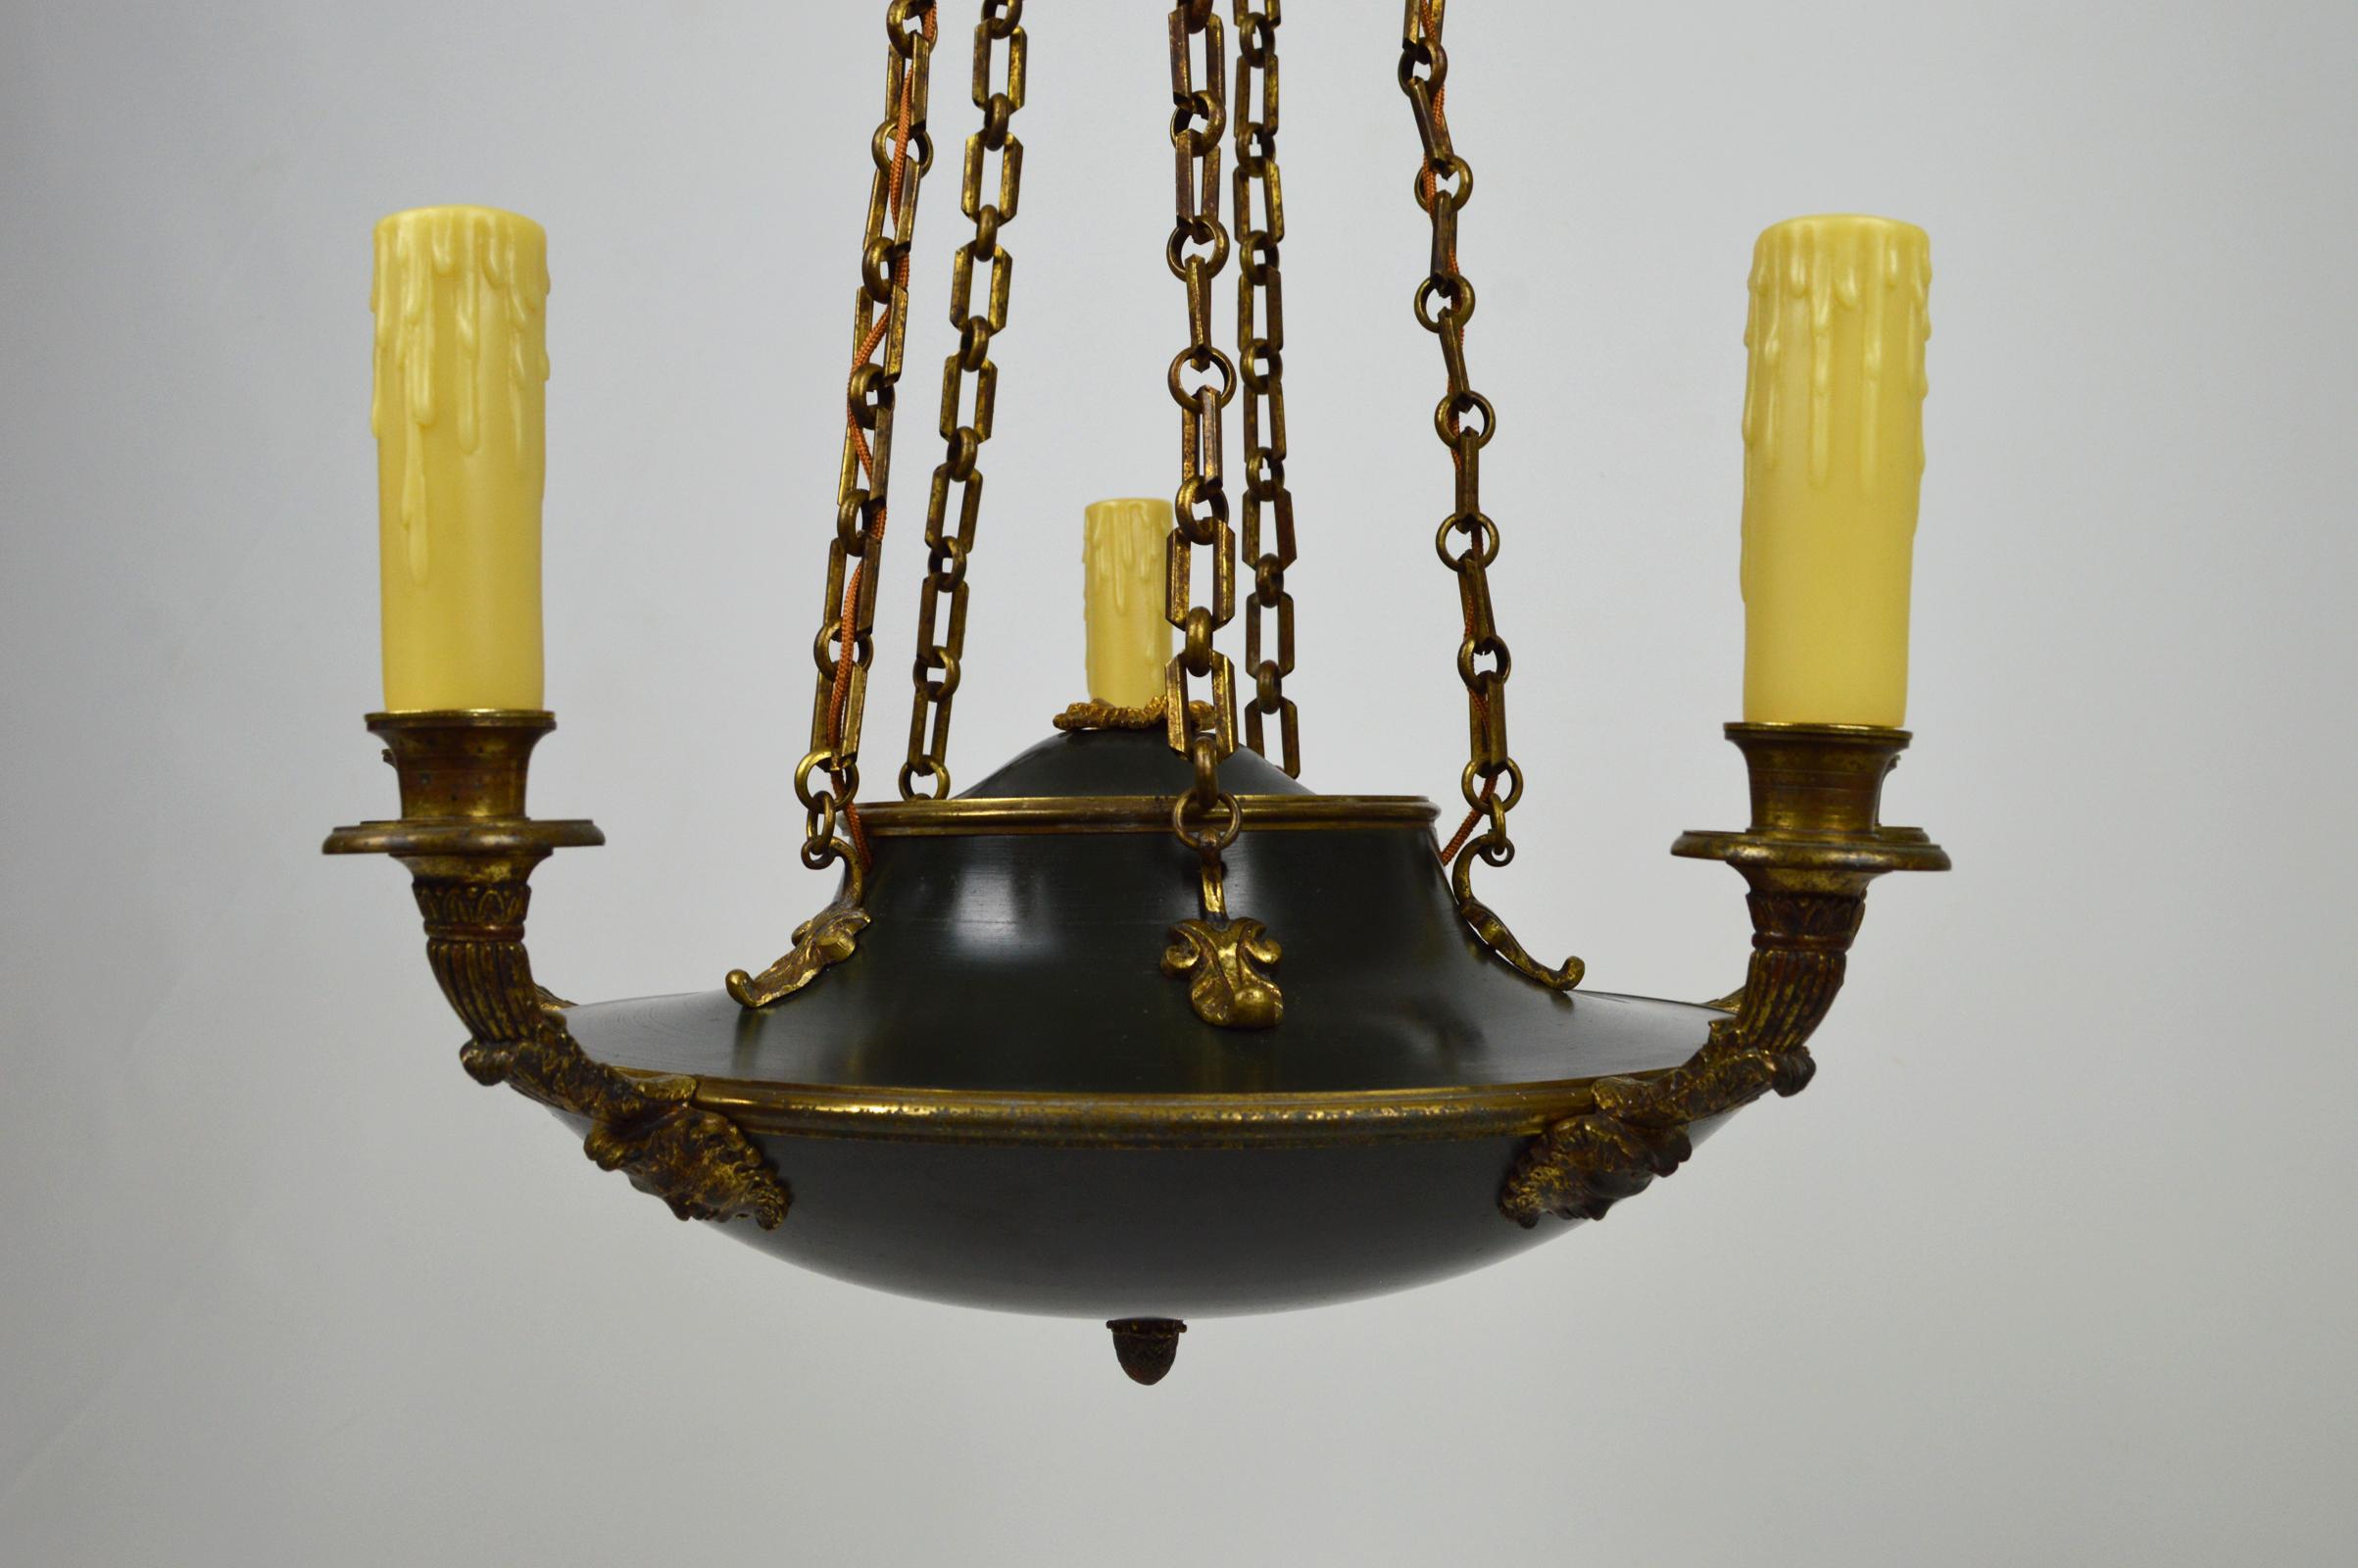 Antique French Empire Chandelier in Patinated Bronze, 19th Century For Sale 5